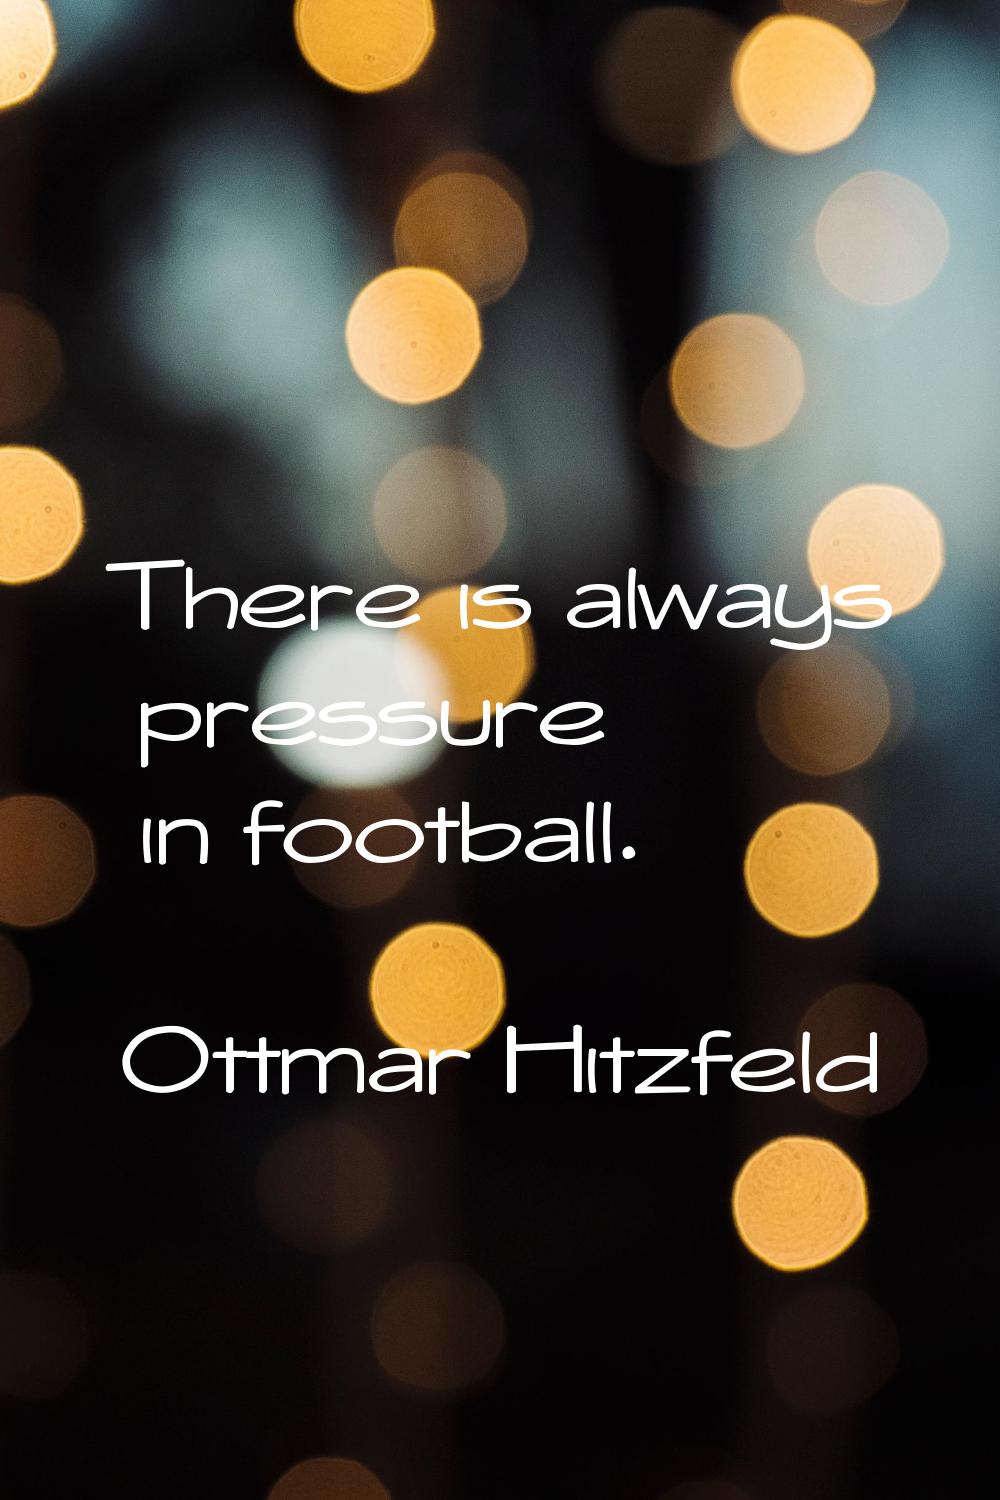 There is always pressure in football.